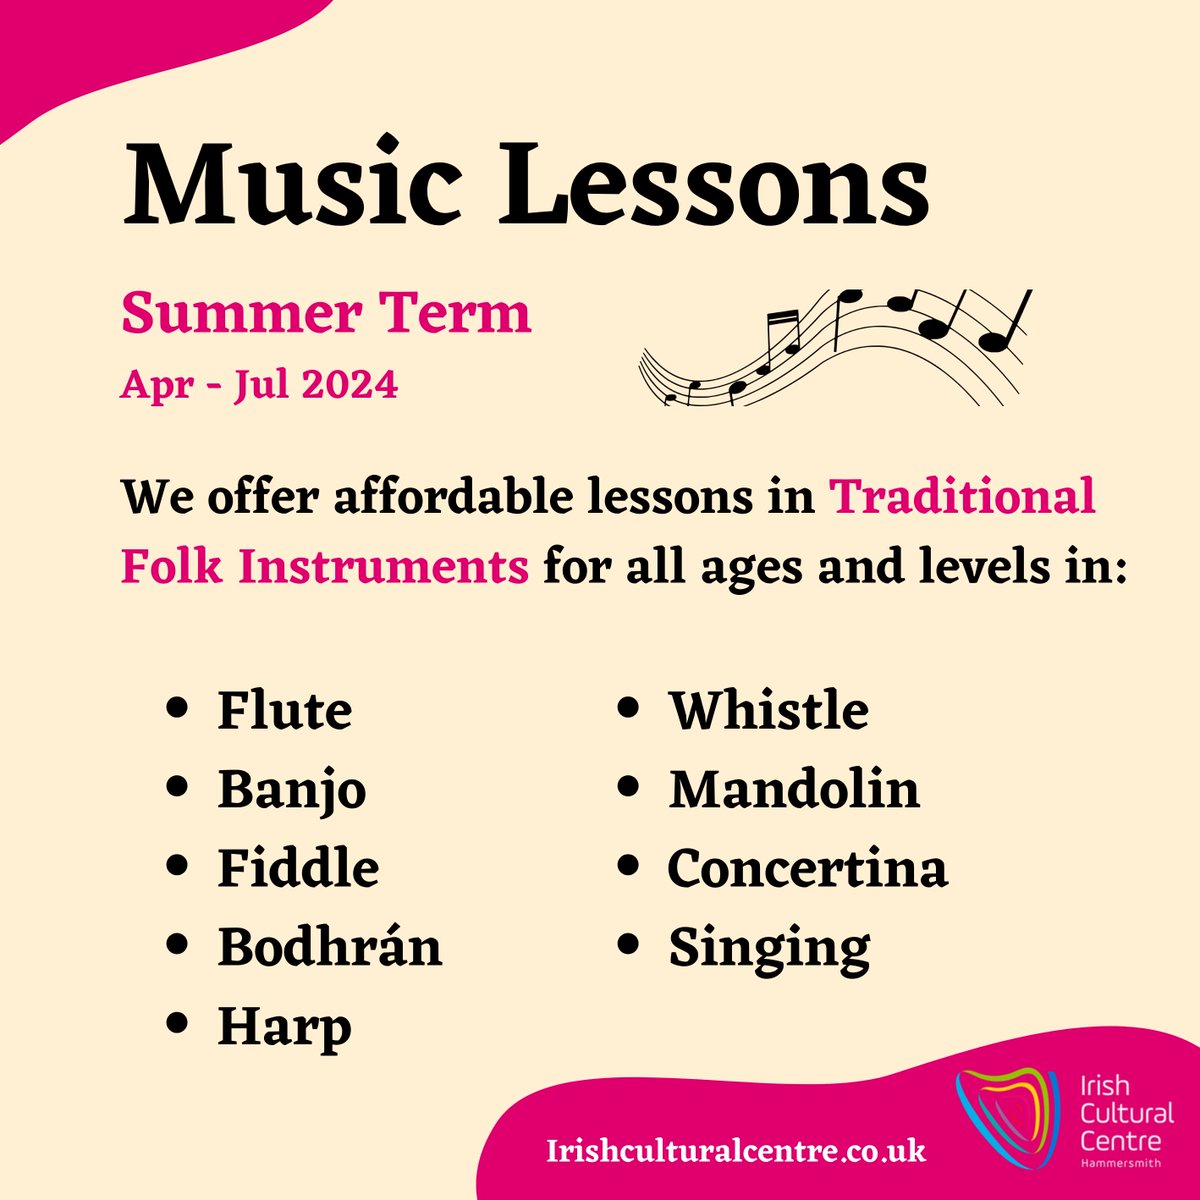 ⏰ Reminder that enrolment for our summer term of #MusicLessons closes this Friday 26 April by 5pm. Please register before then if you would like to get a place. 🌸irishculturalcentre.co.uk/education/musi…